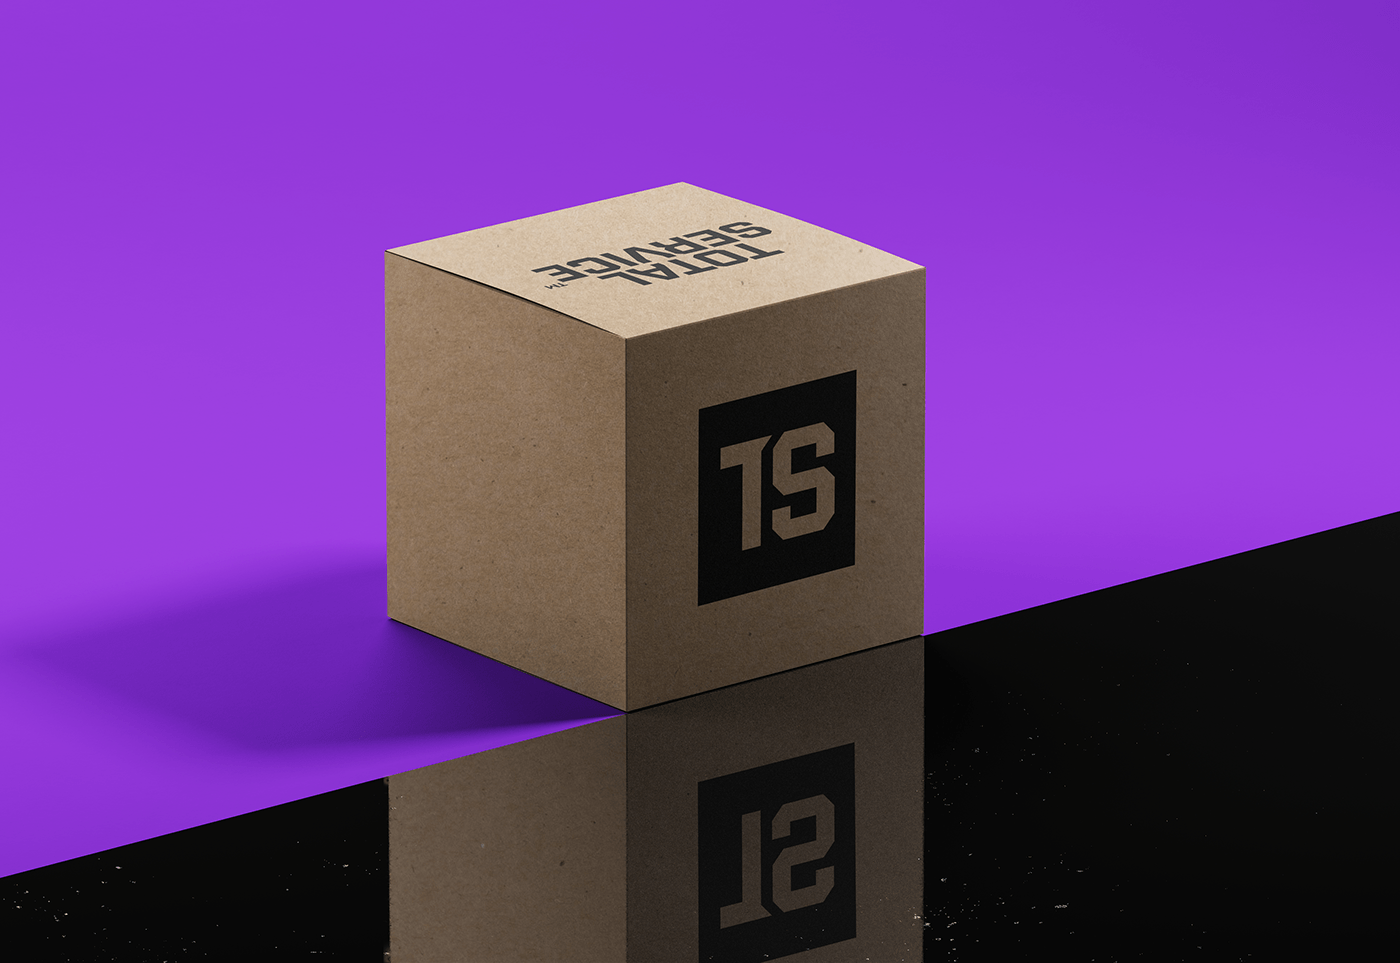 This is packaging design of a giftbox for clients and employees with the logo on it.